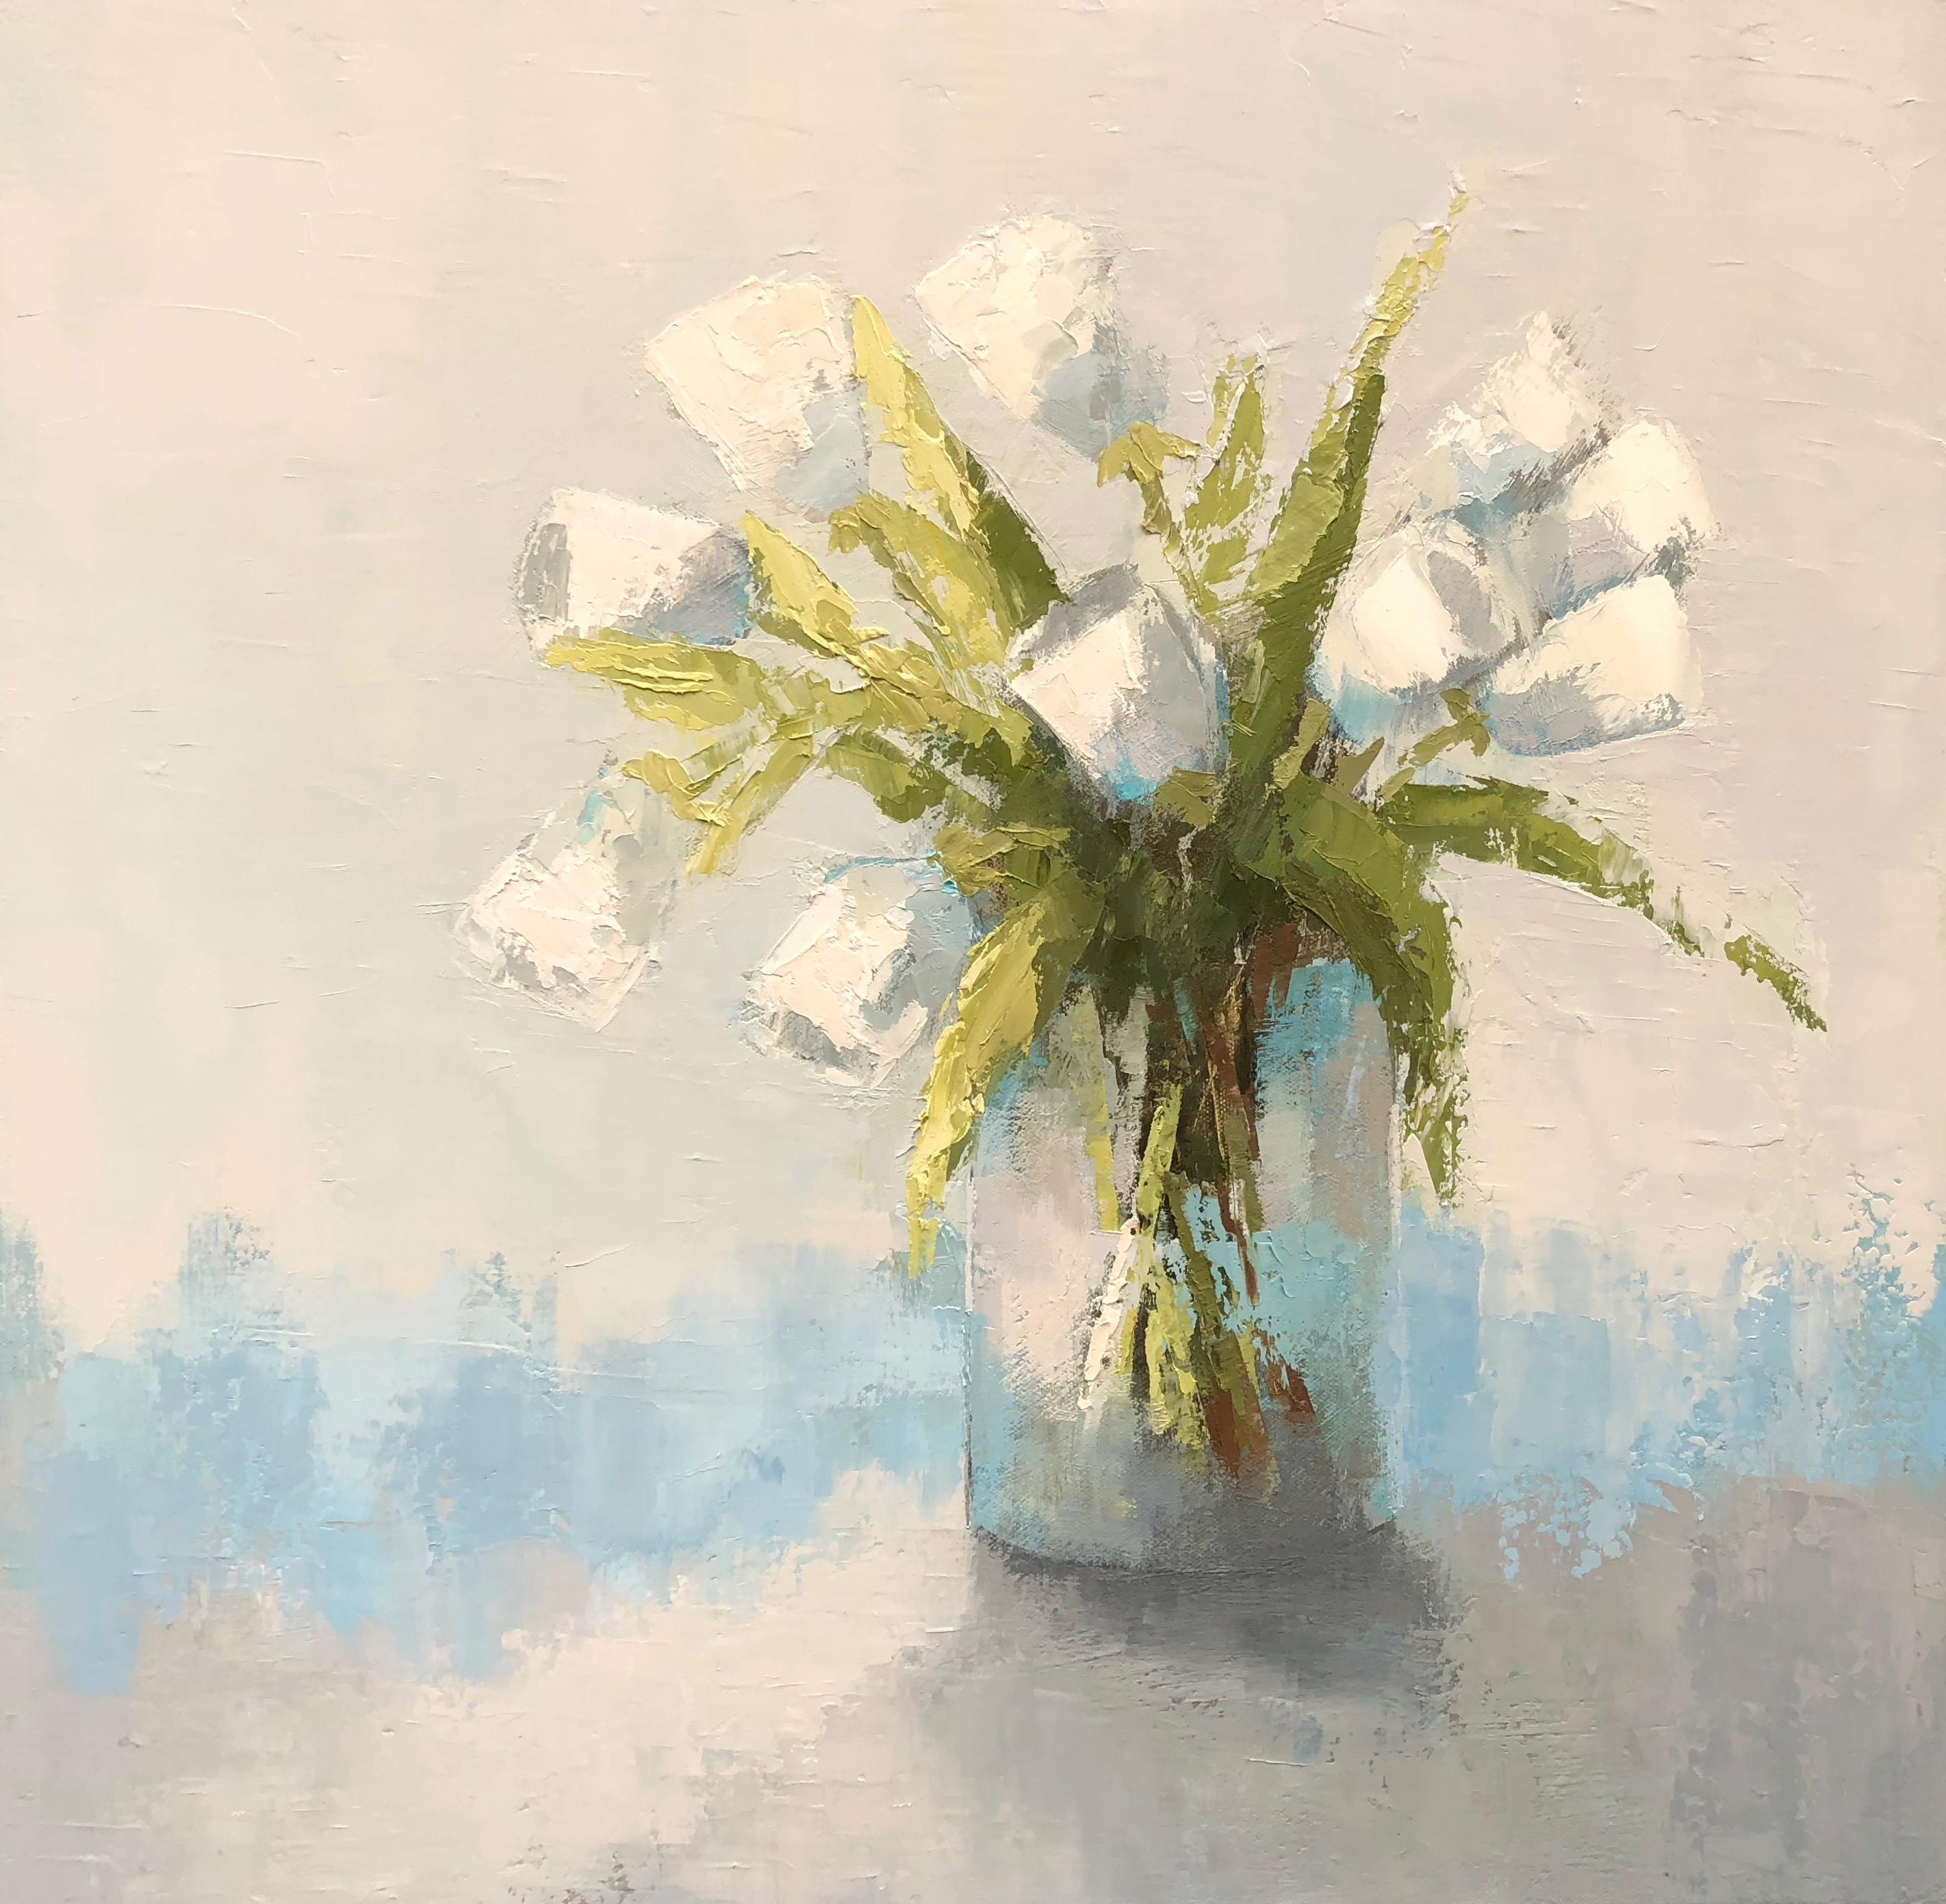 'Turquoise and Tulips' is a medium size framed Impressionist oil on canvas still-life floral painting of square format, created by American artist Angela Nesbit in 2018. Featuring a soft palette made of turquoise, white, cream and green tones, the